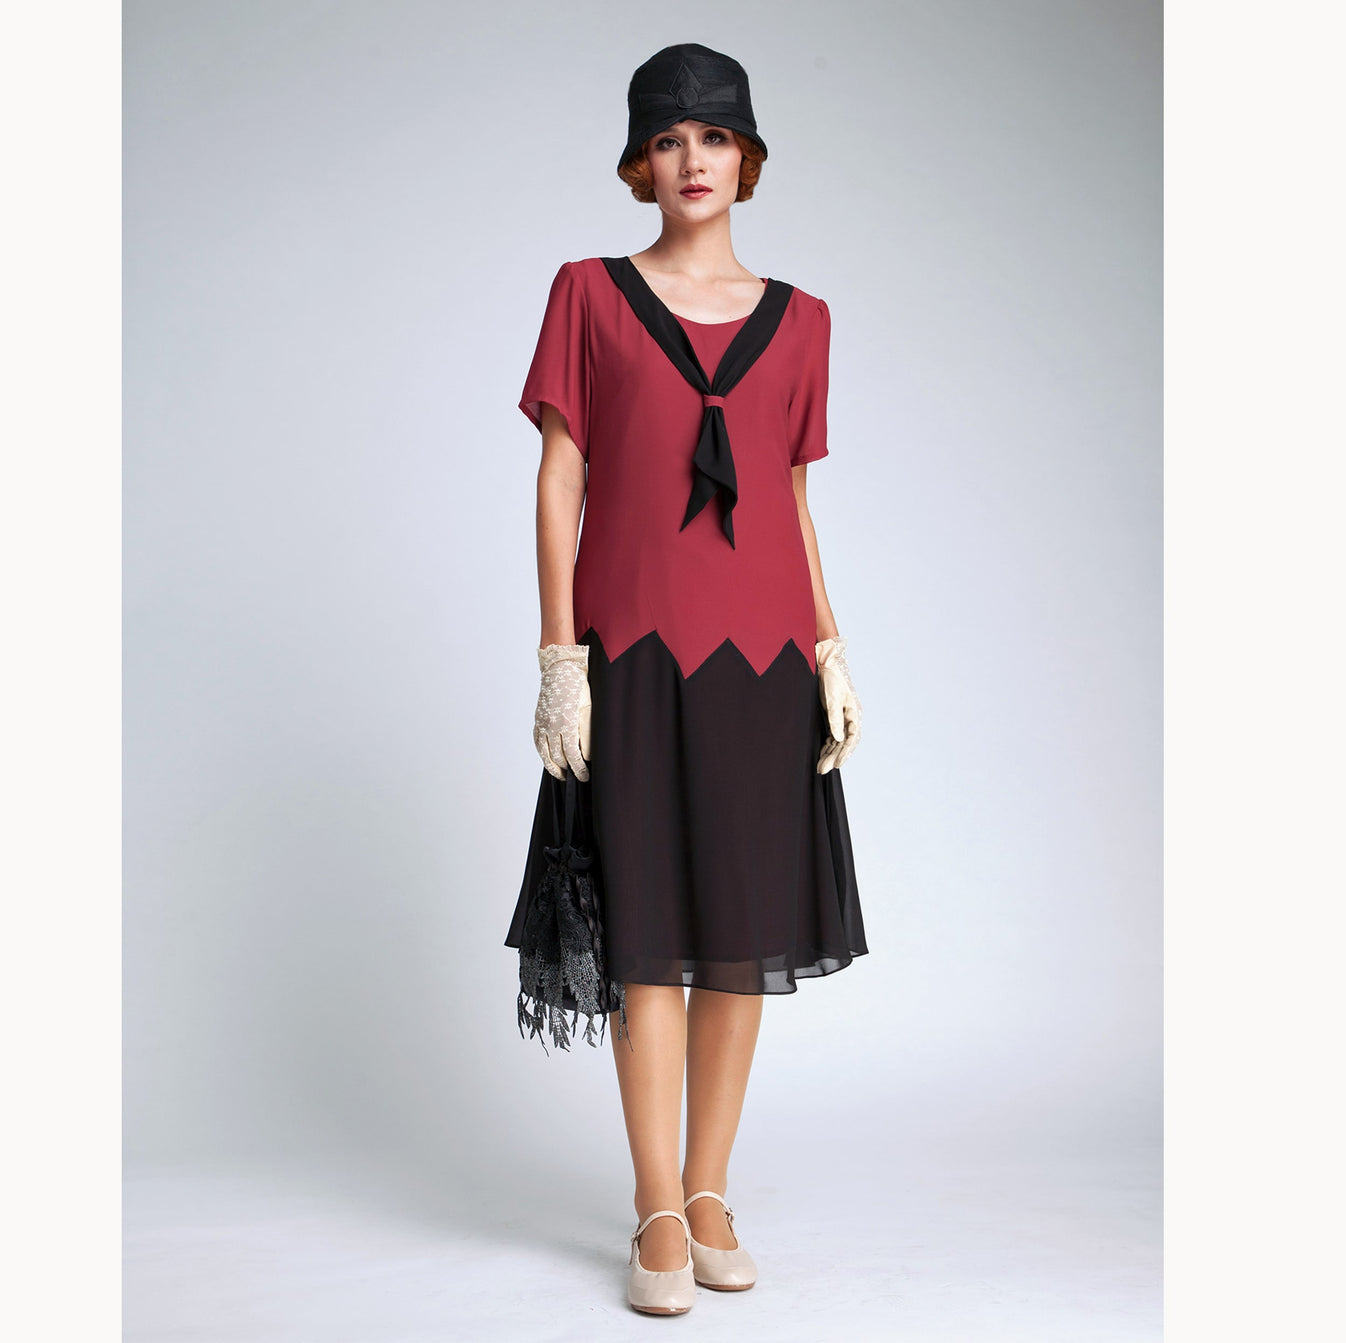 1920s inspired dress in maroon red and black with zig zag detail ...